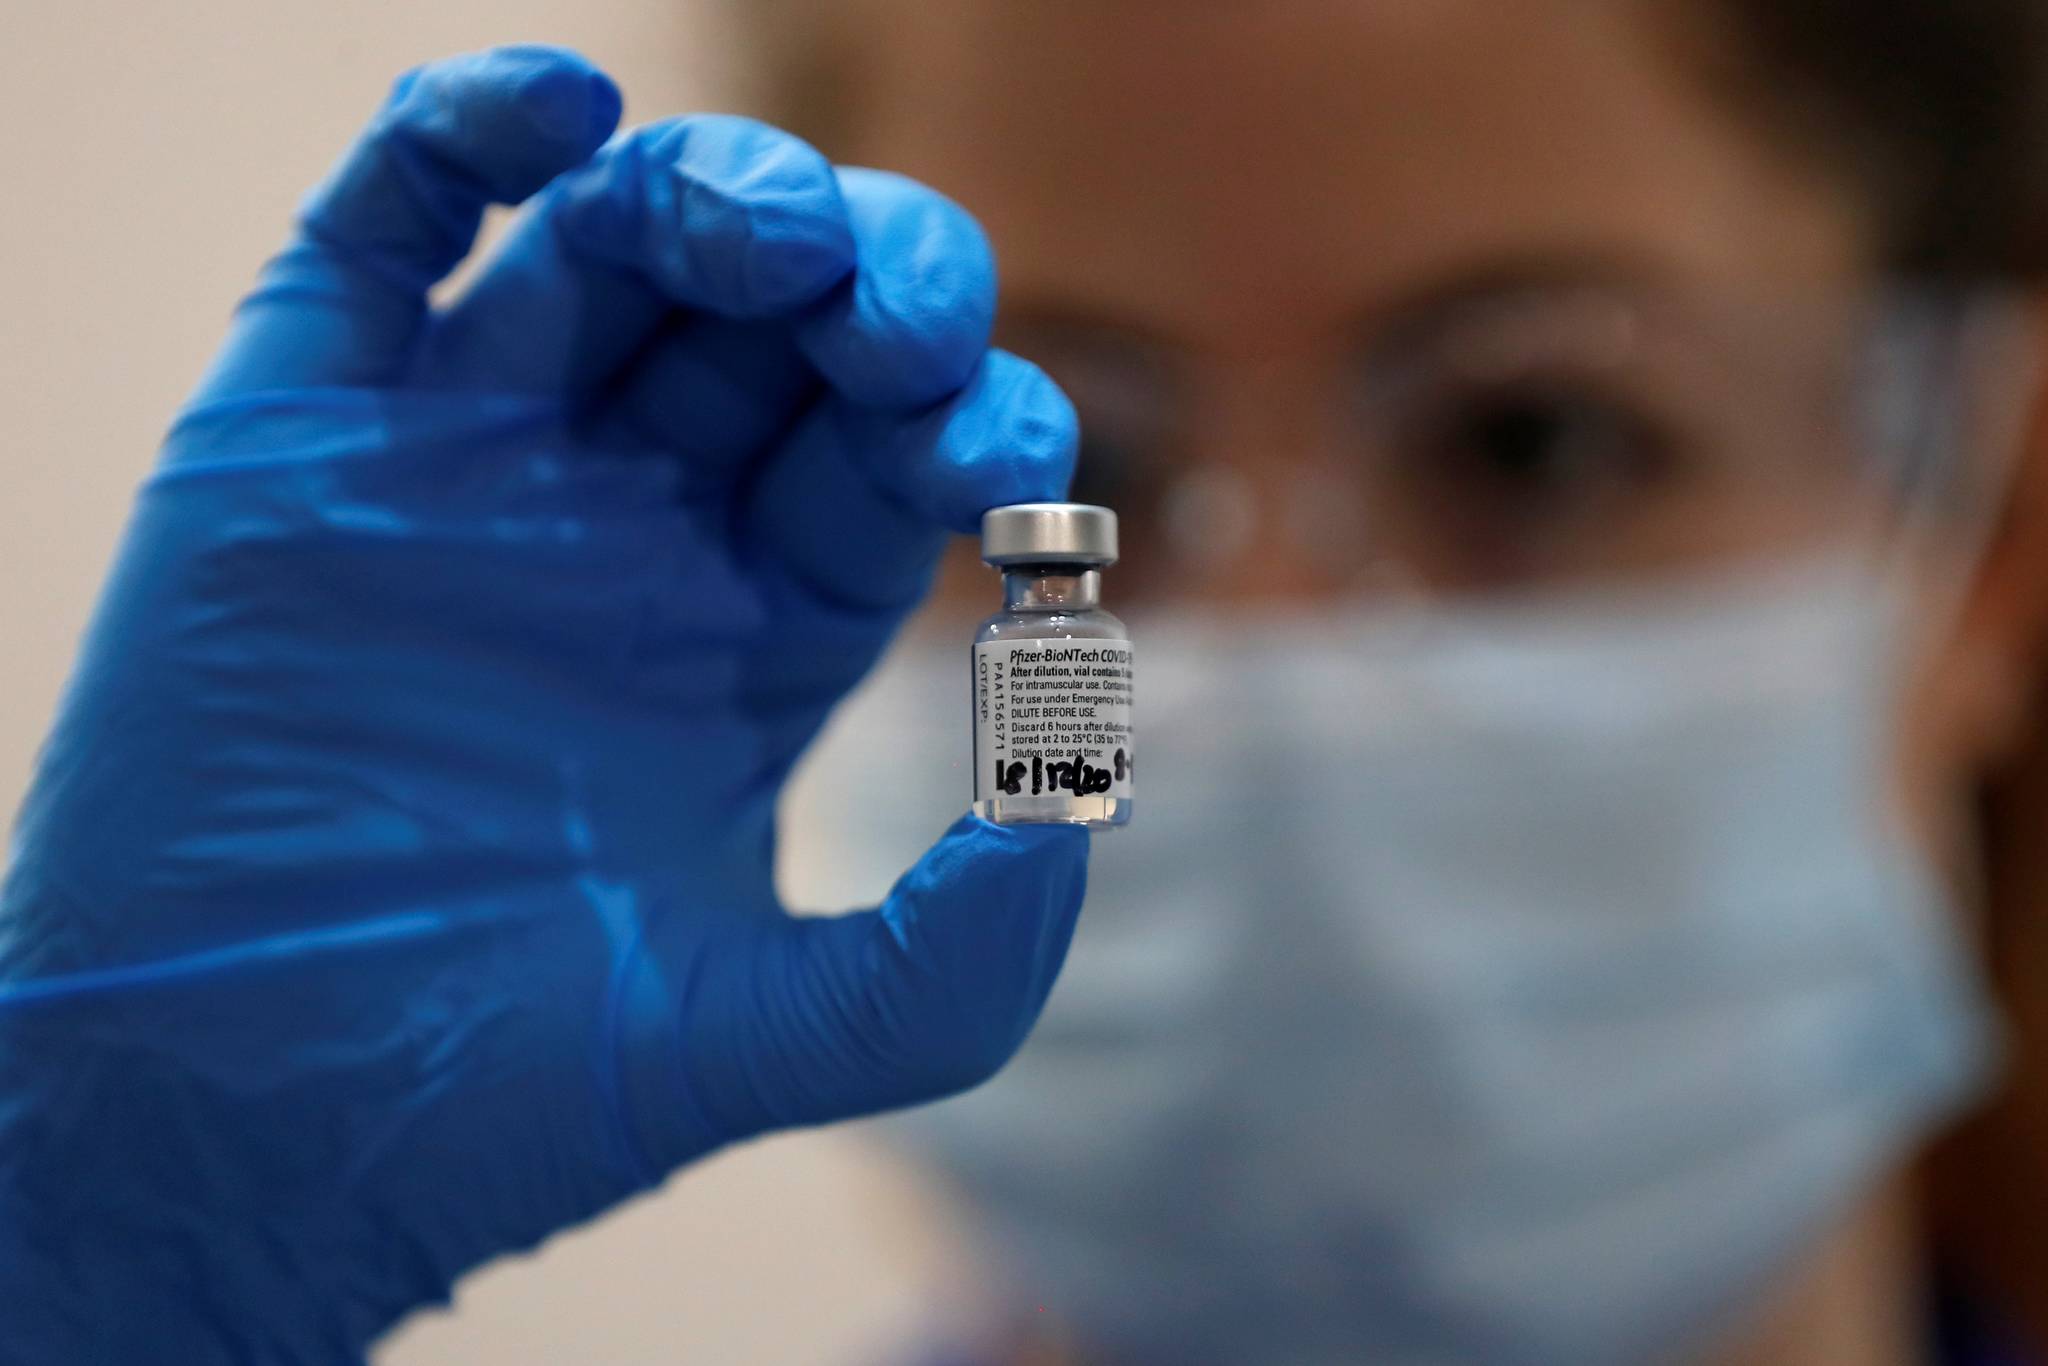 A nurse holds a phial of the Pfizer-BioNTech COVID-19 vaccine at Guy's Hospital in London, Tuesday, Dec. 8, 2020, as the U.K. health authorities rolled out a national mass vaccination program.  U.K. regulators said Wednesday Dec. 9, 2020, that people who have a “significant history’’ of allergic reactions shouldn’t receive the new Pfizer/BioNTech vaccine while they investigate two adverse reactions that occurred on the first day of the country’s mass vaccination program.  (AP Photo/Frank Augstein, Pool)